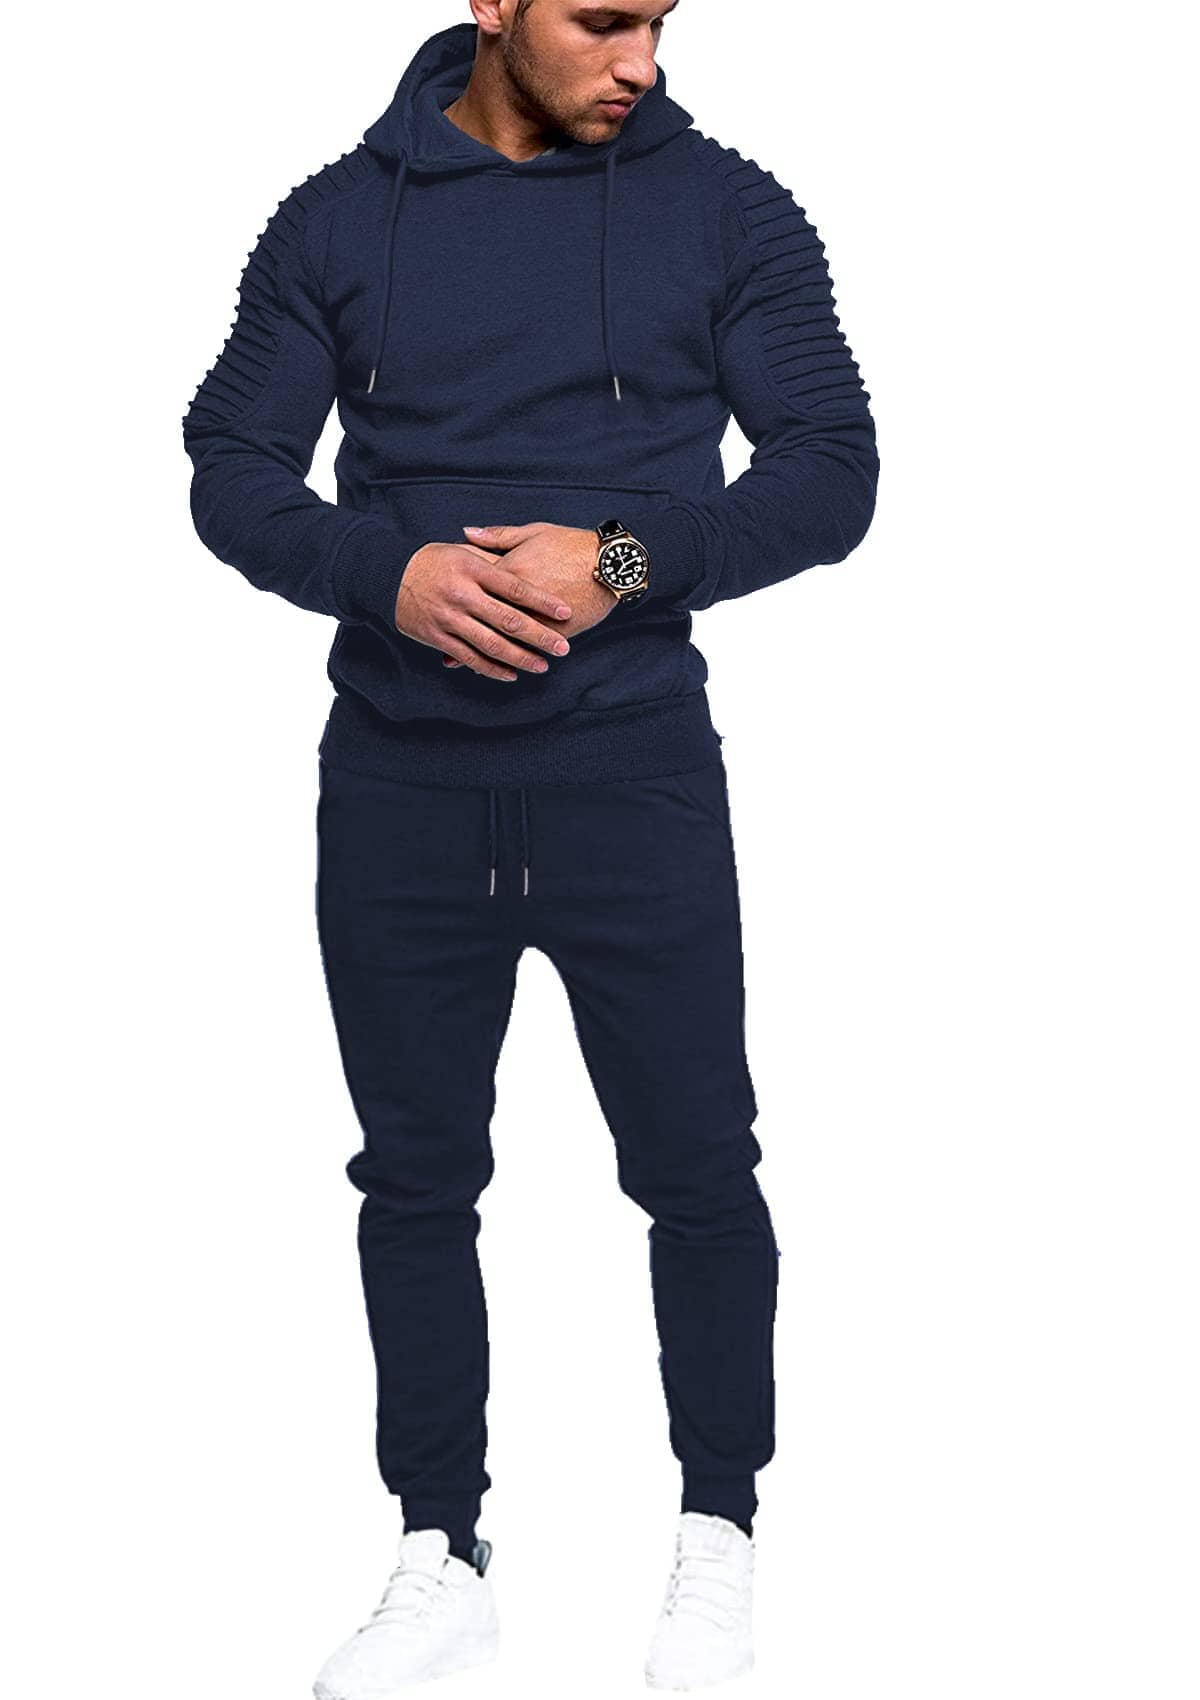 2 Piece Hoodie Jogging Athletic Suits (US Only) Sports Set Coofandy's Navy Blue S 